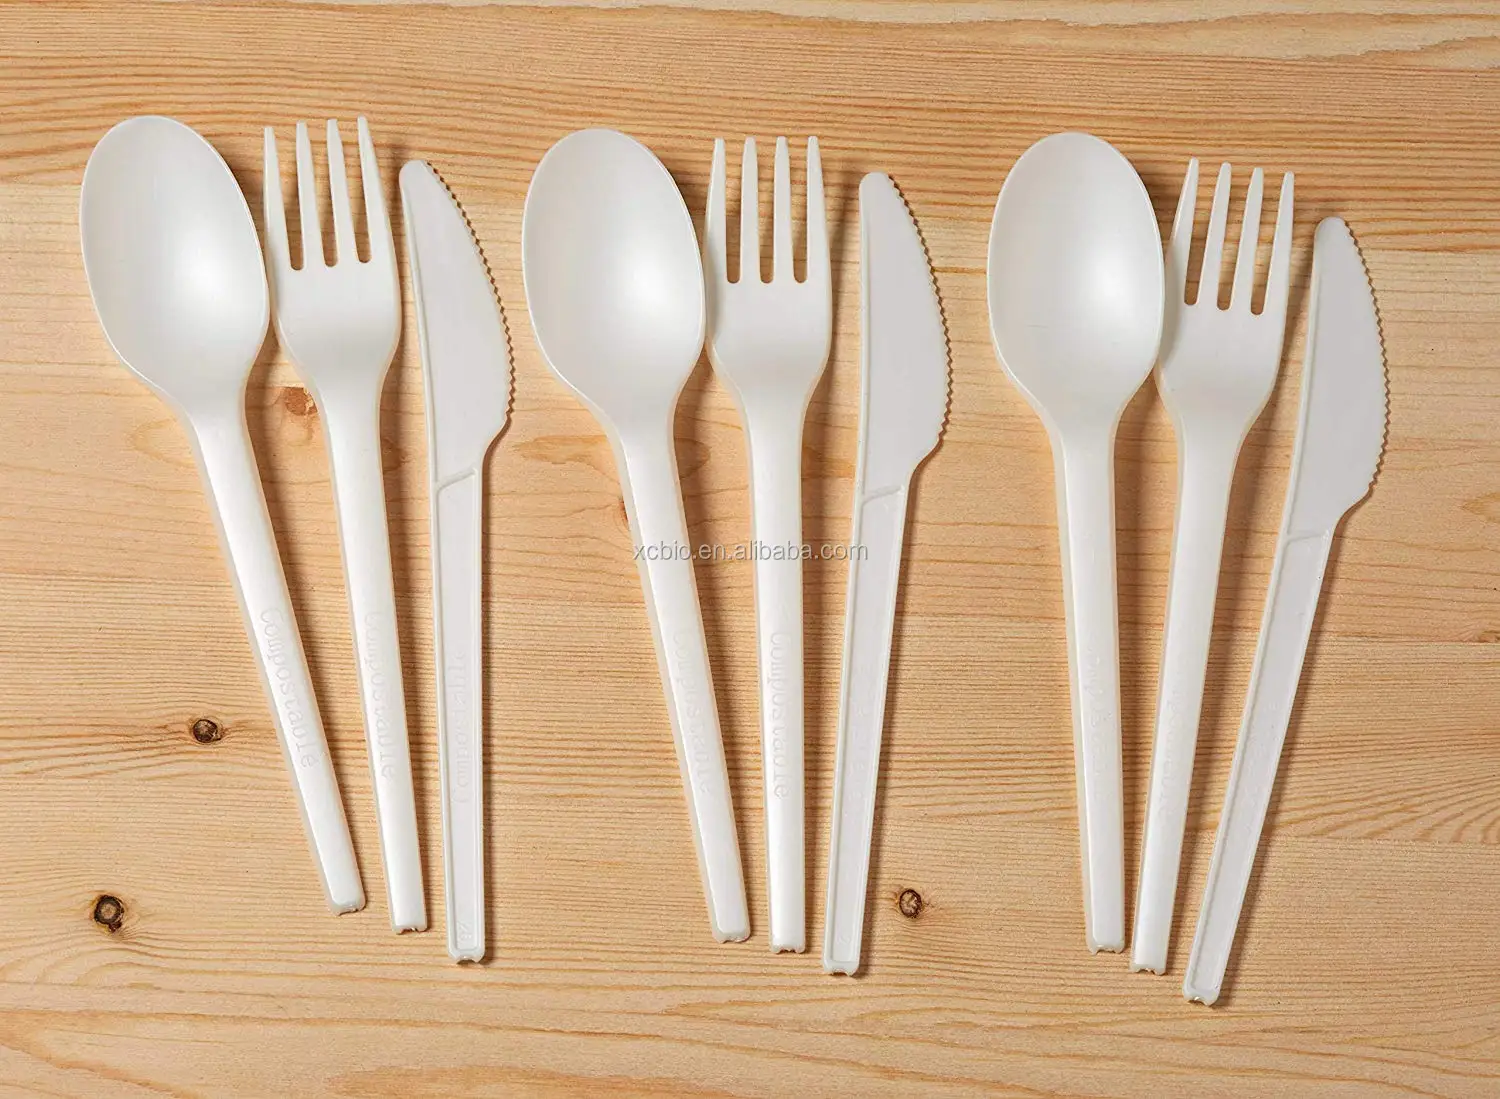 BPI Certified Compostable And Disposable - Eco Friendly Alternative to Silverware Compostable Cutlery Set